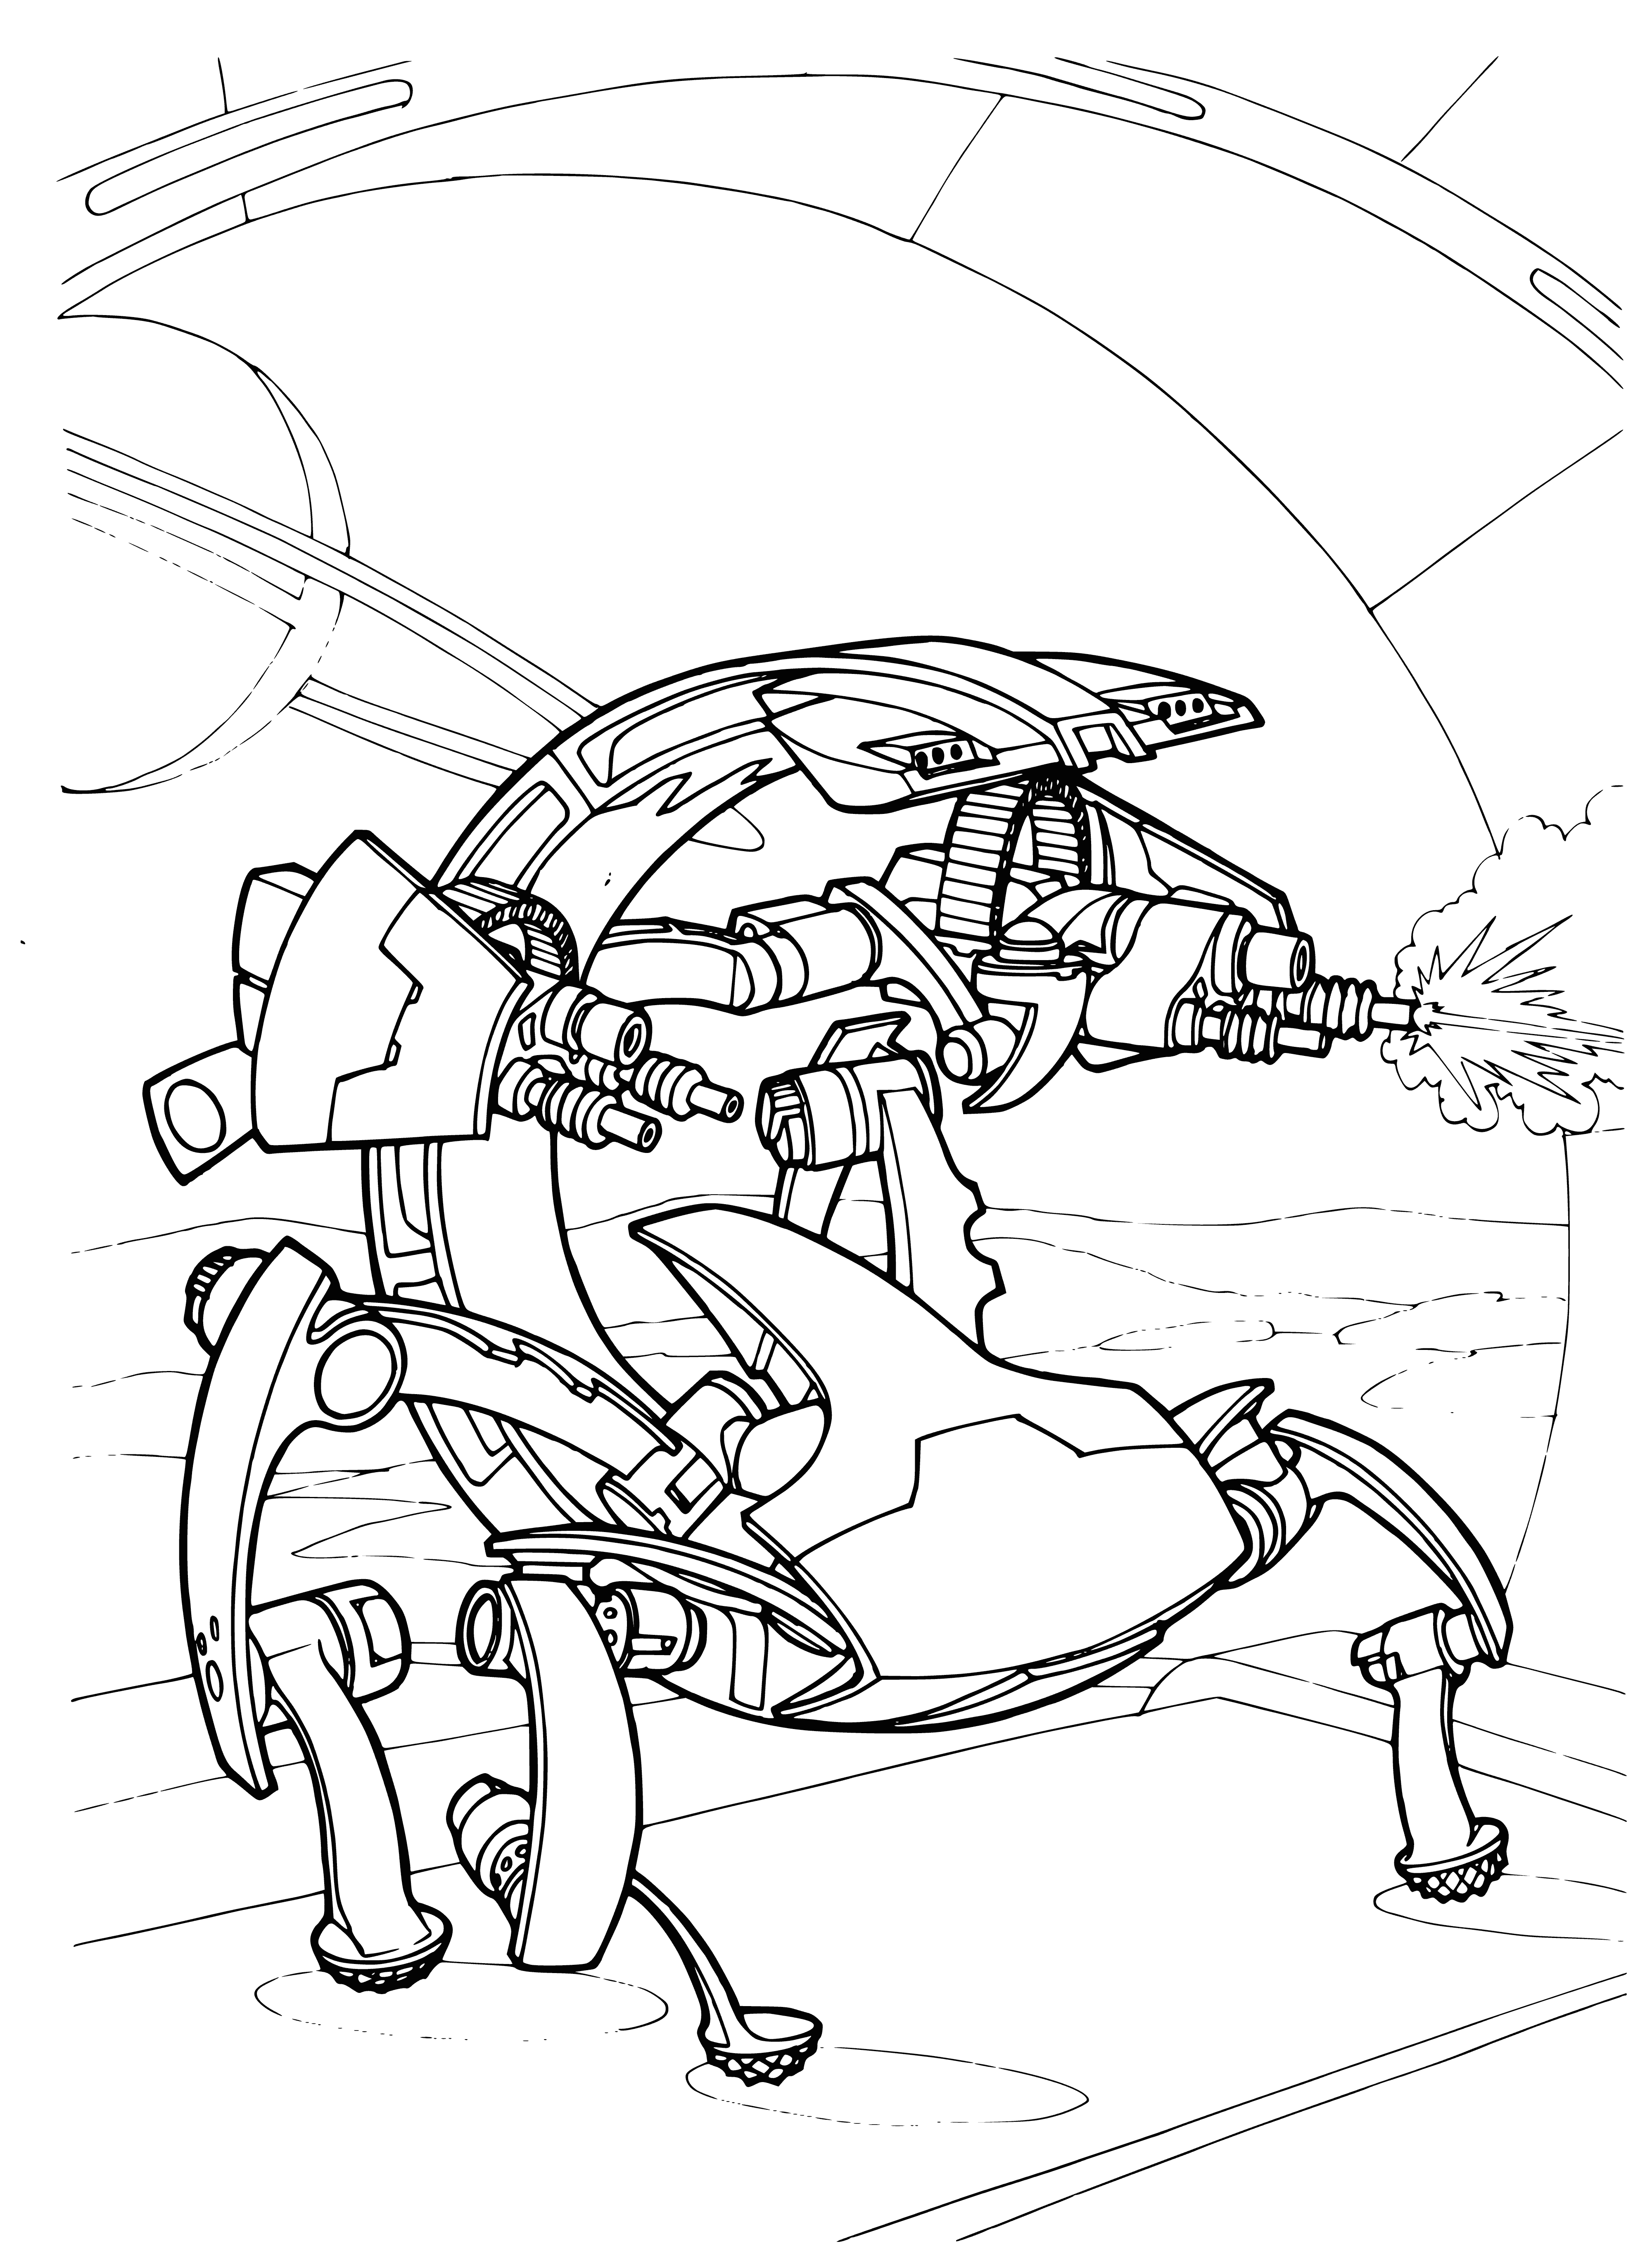 coloring page: Giant robot crushes smaller mechs and humans on a battlefield in epic battle of laser beams & explosions.